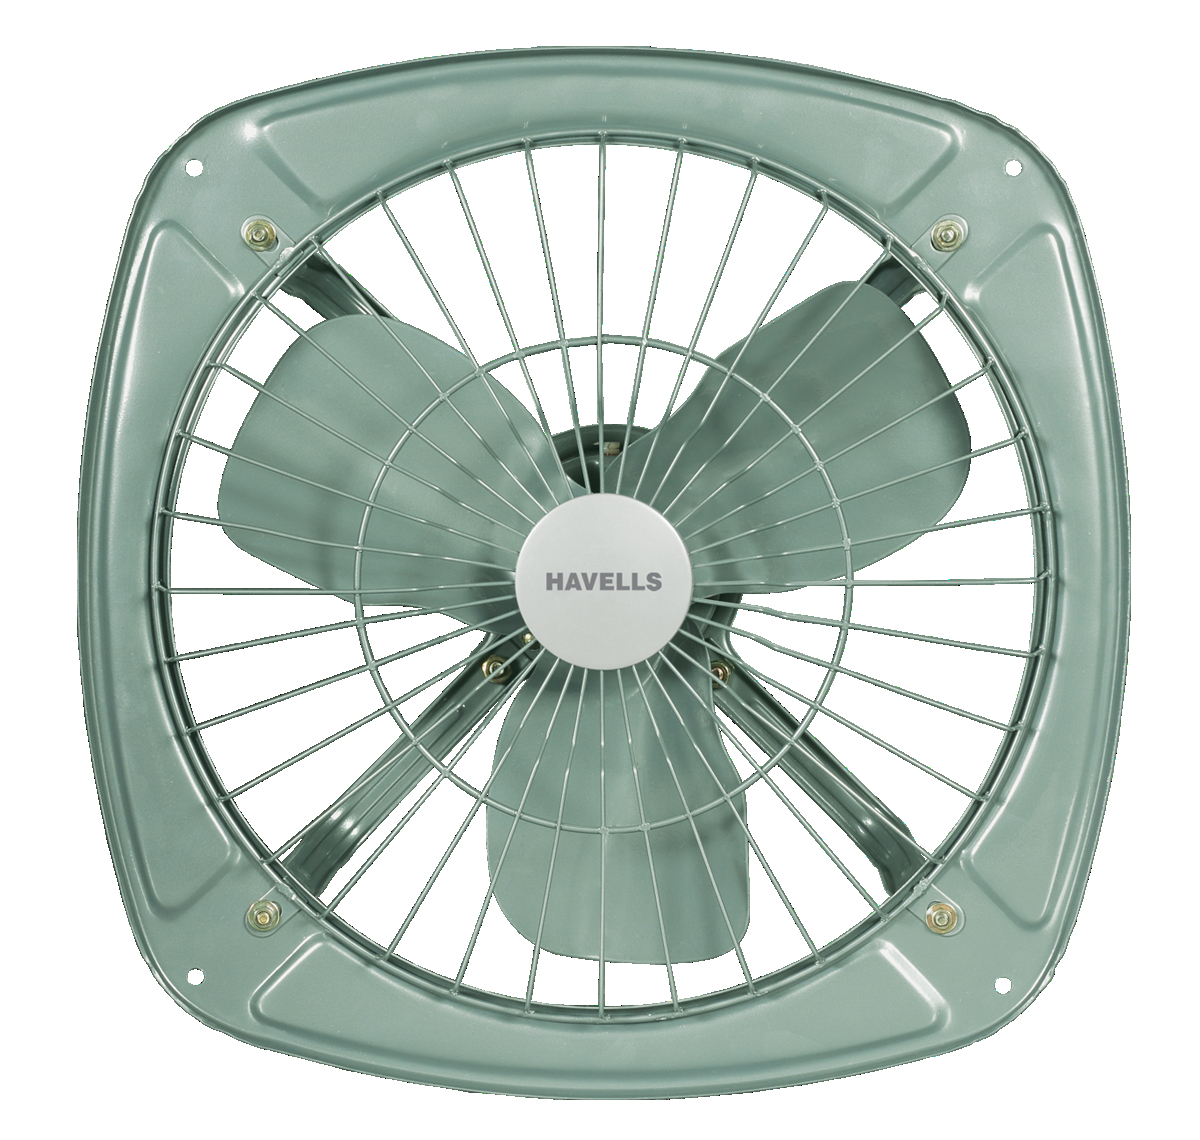 Ventilair Ds for sizing 1200 X 1140